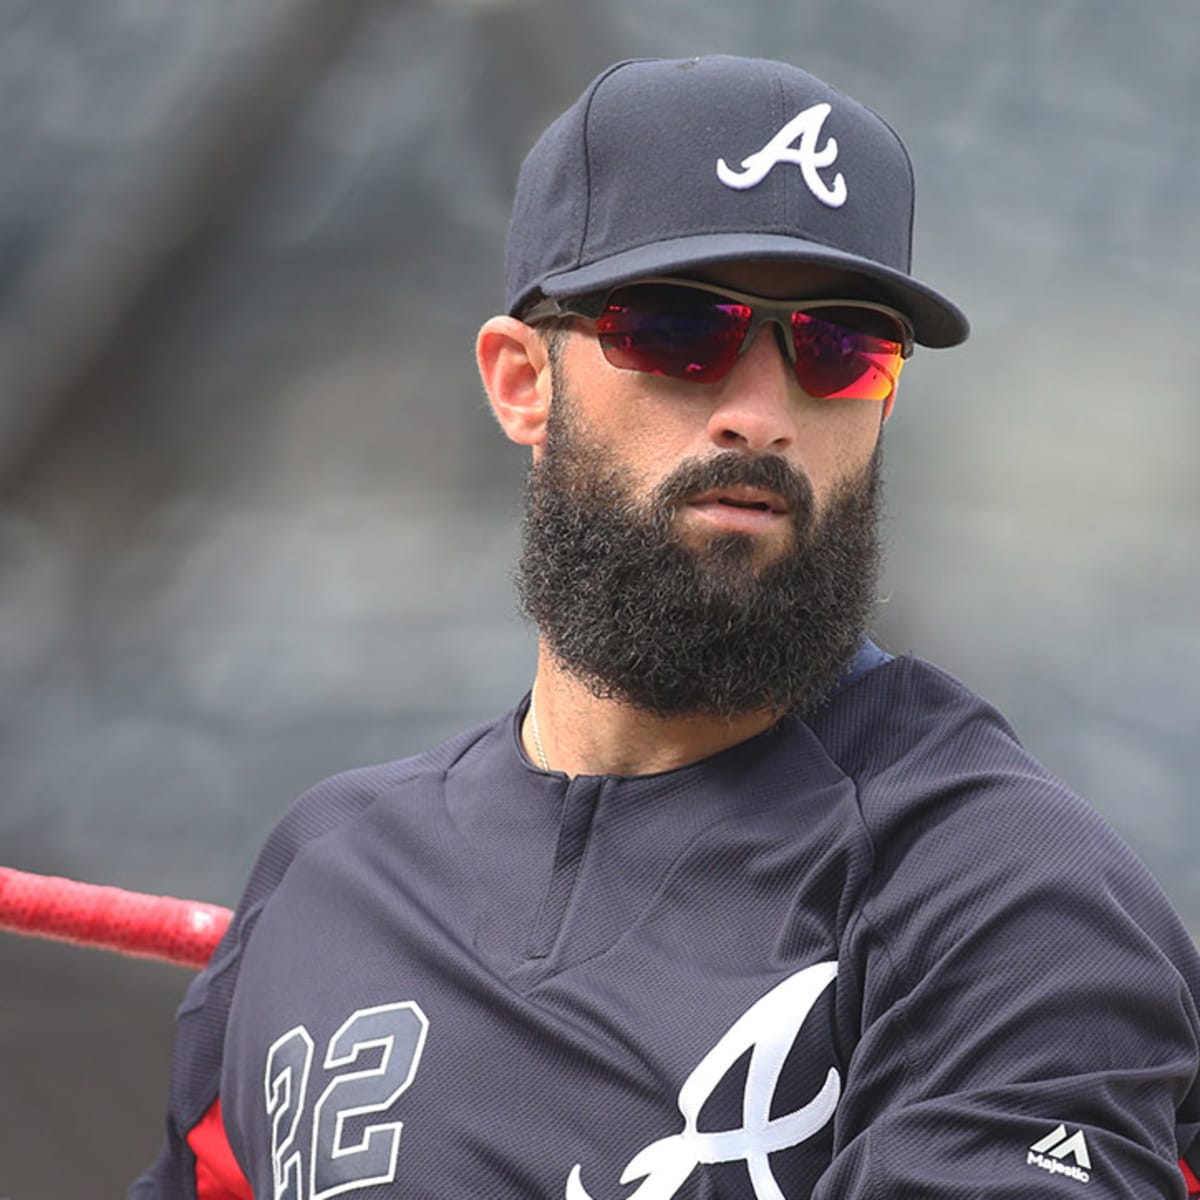 Nick Markakis says every Astro 'needs a beating' for stealing